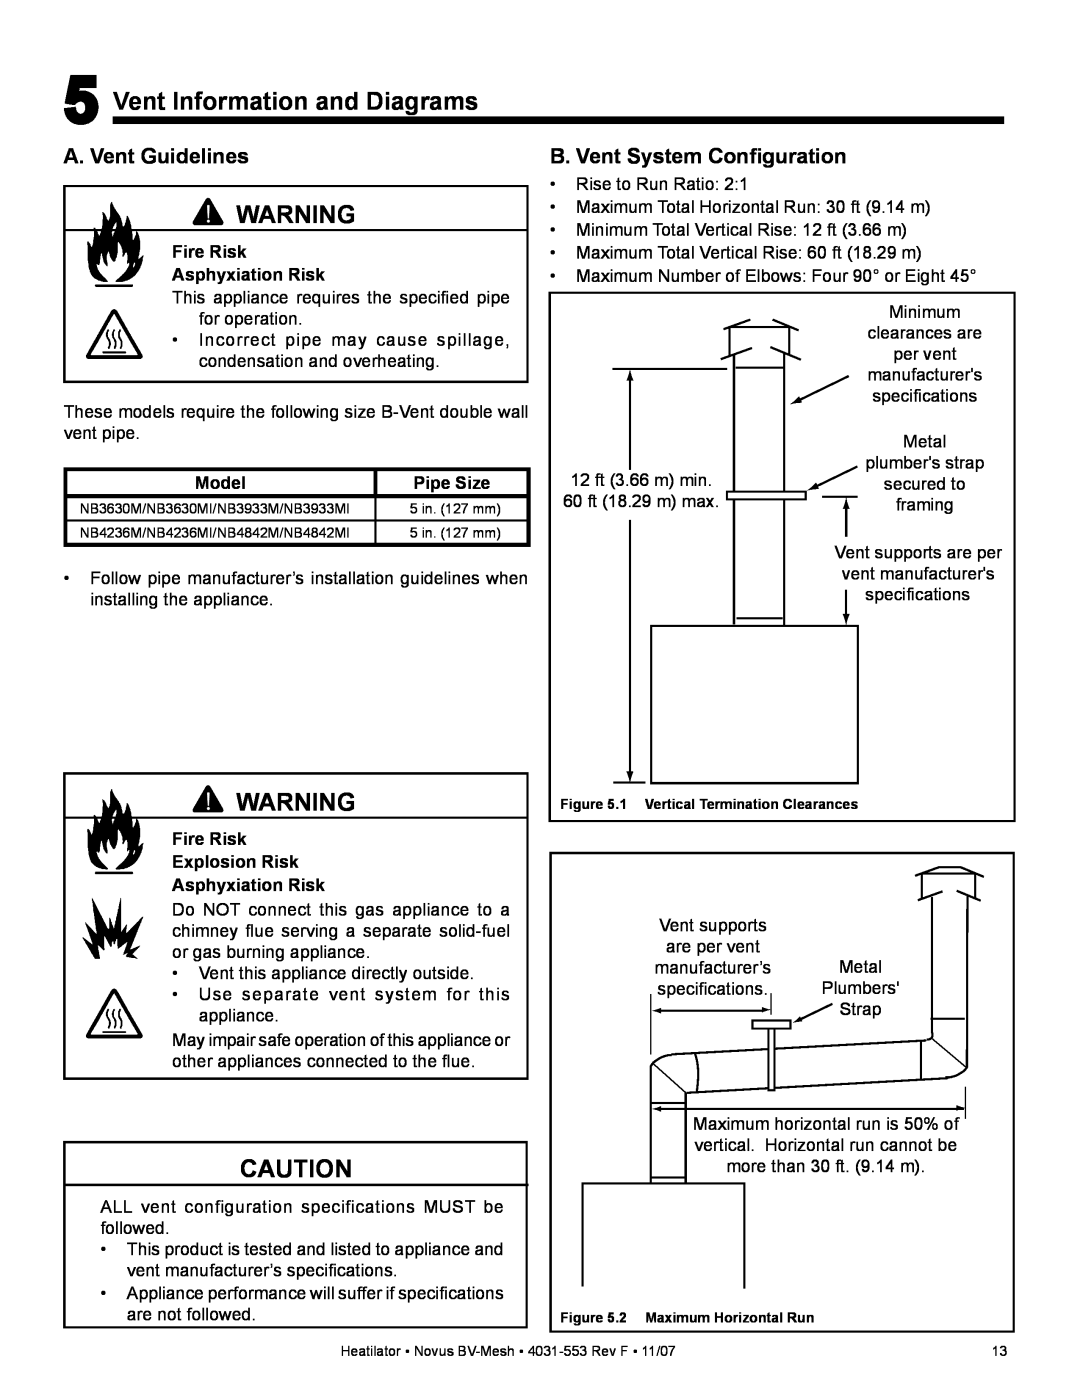 Heatiator NB3630MI Vent Information and Diagrams, A. Vent Guidelines, B. Vent System Conﬁguration, Fire Risk, Model 